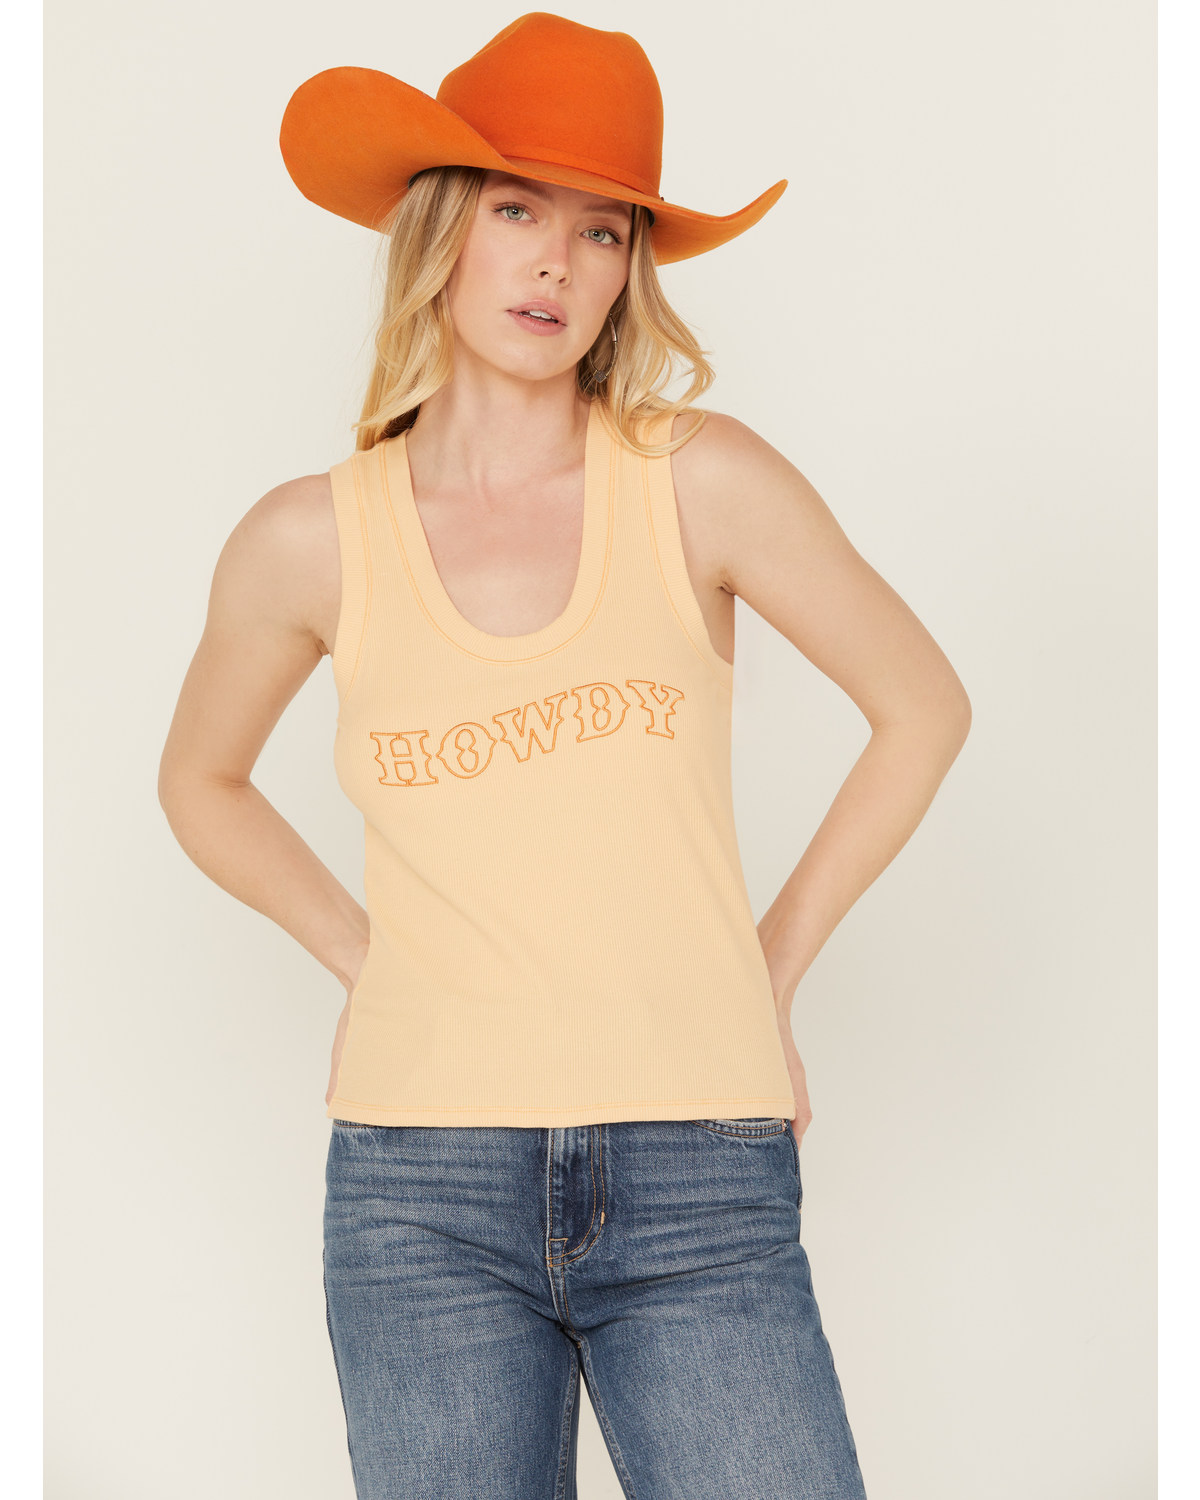 White Crow Women's Howdy Embroidered Tank